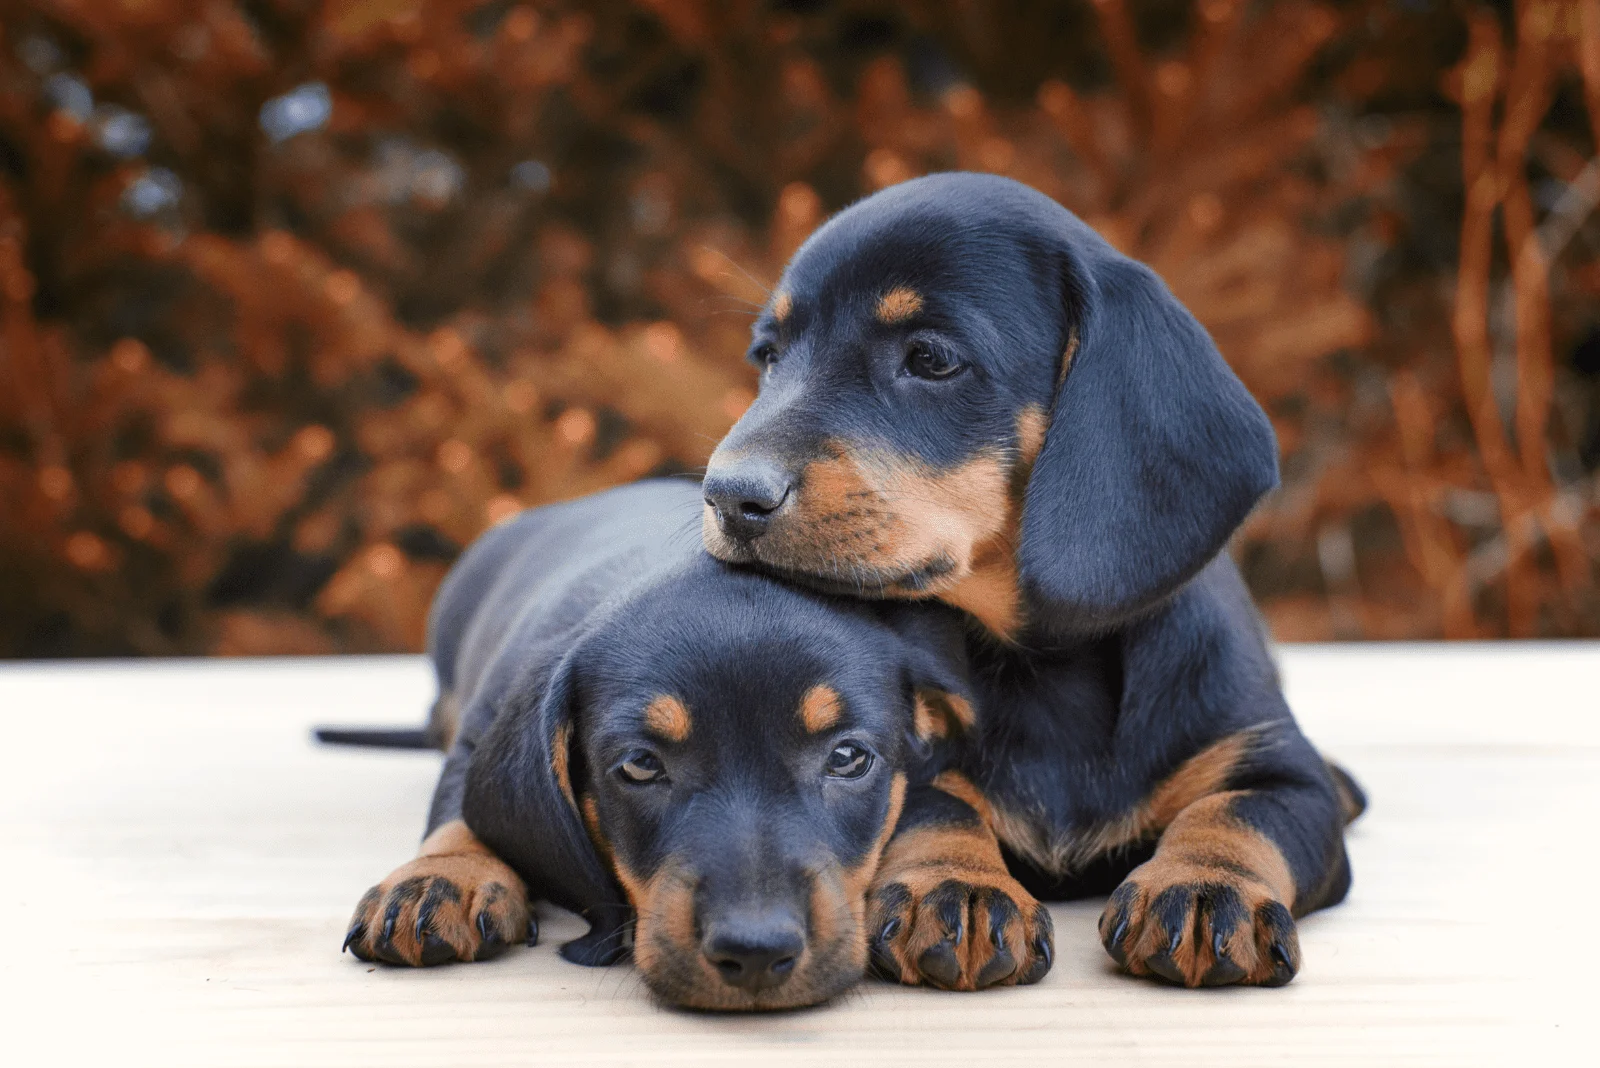 two adorable Dachshunds puppies lying on a tree